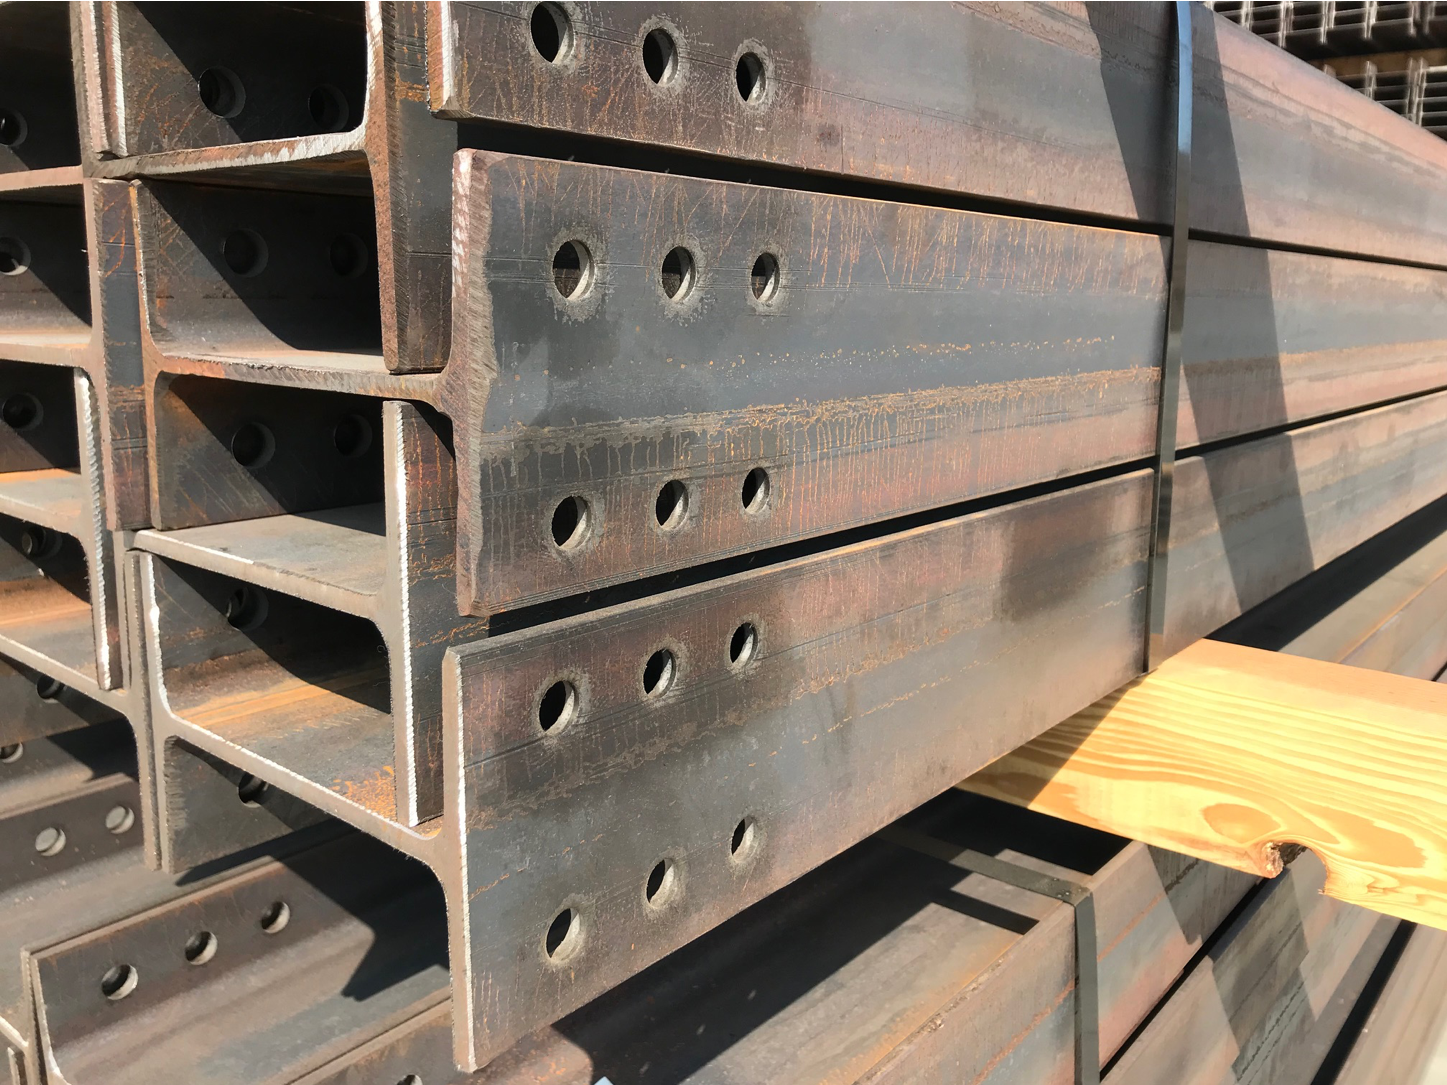 Unimacts manufactures steel beams for the solar industry